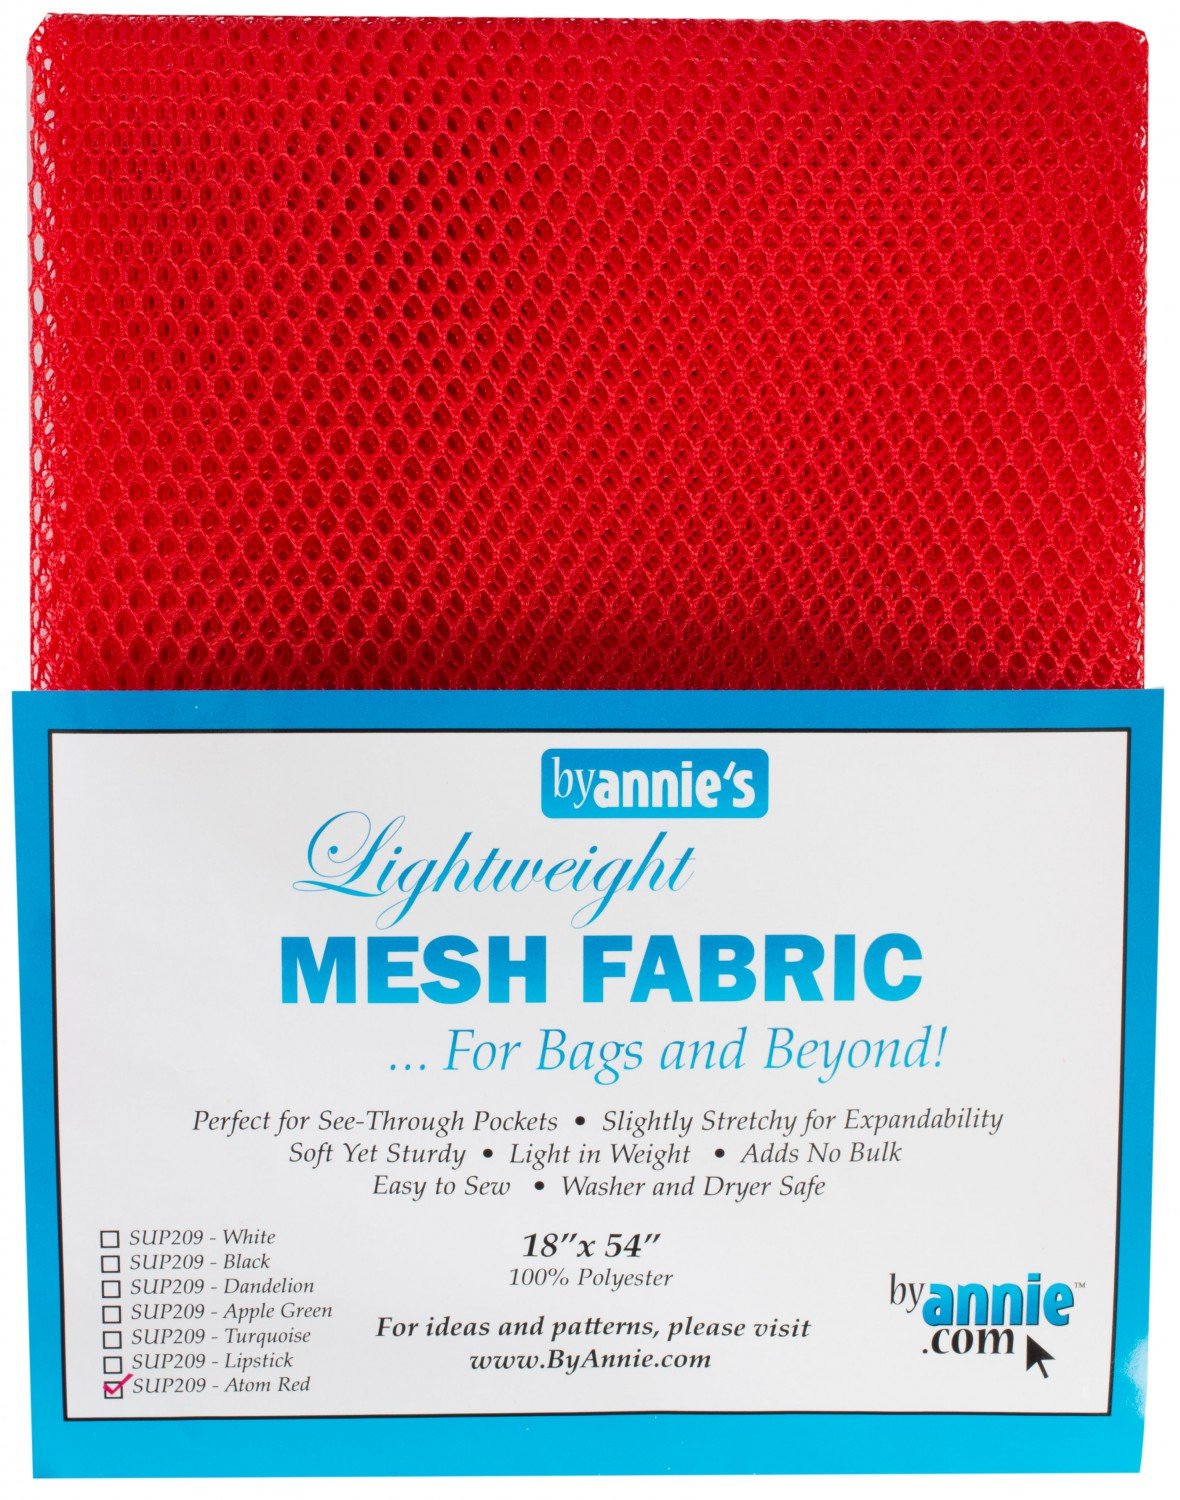 By Annie’s Mesh fabric SUP209 – Atom Red